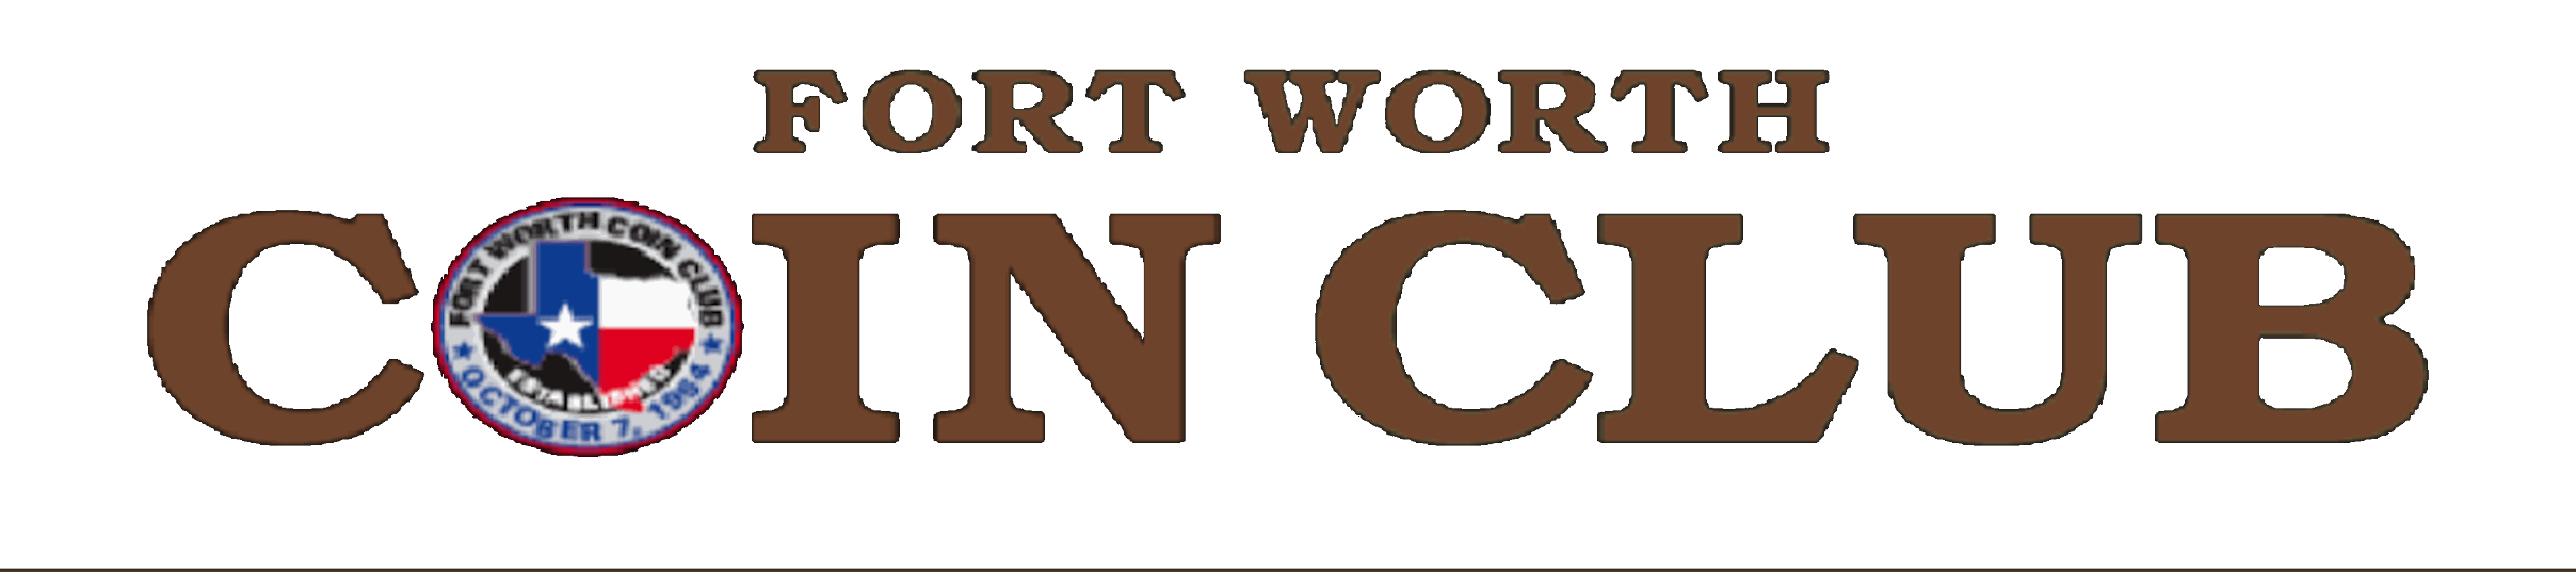 Fort Worth Coin Club